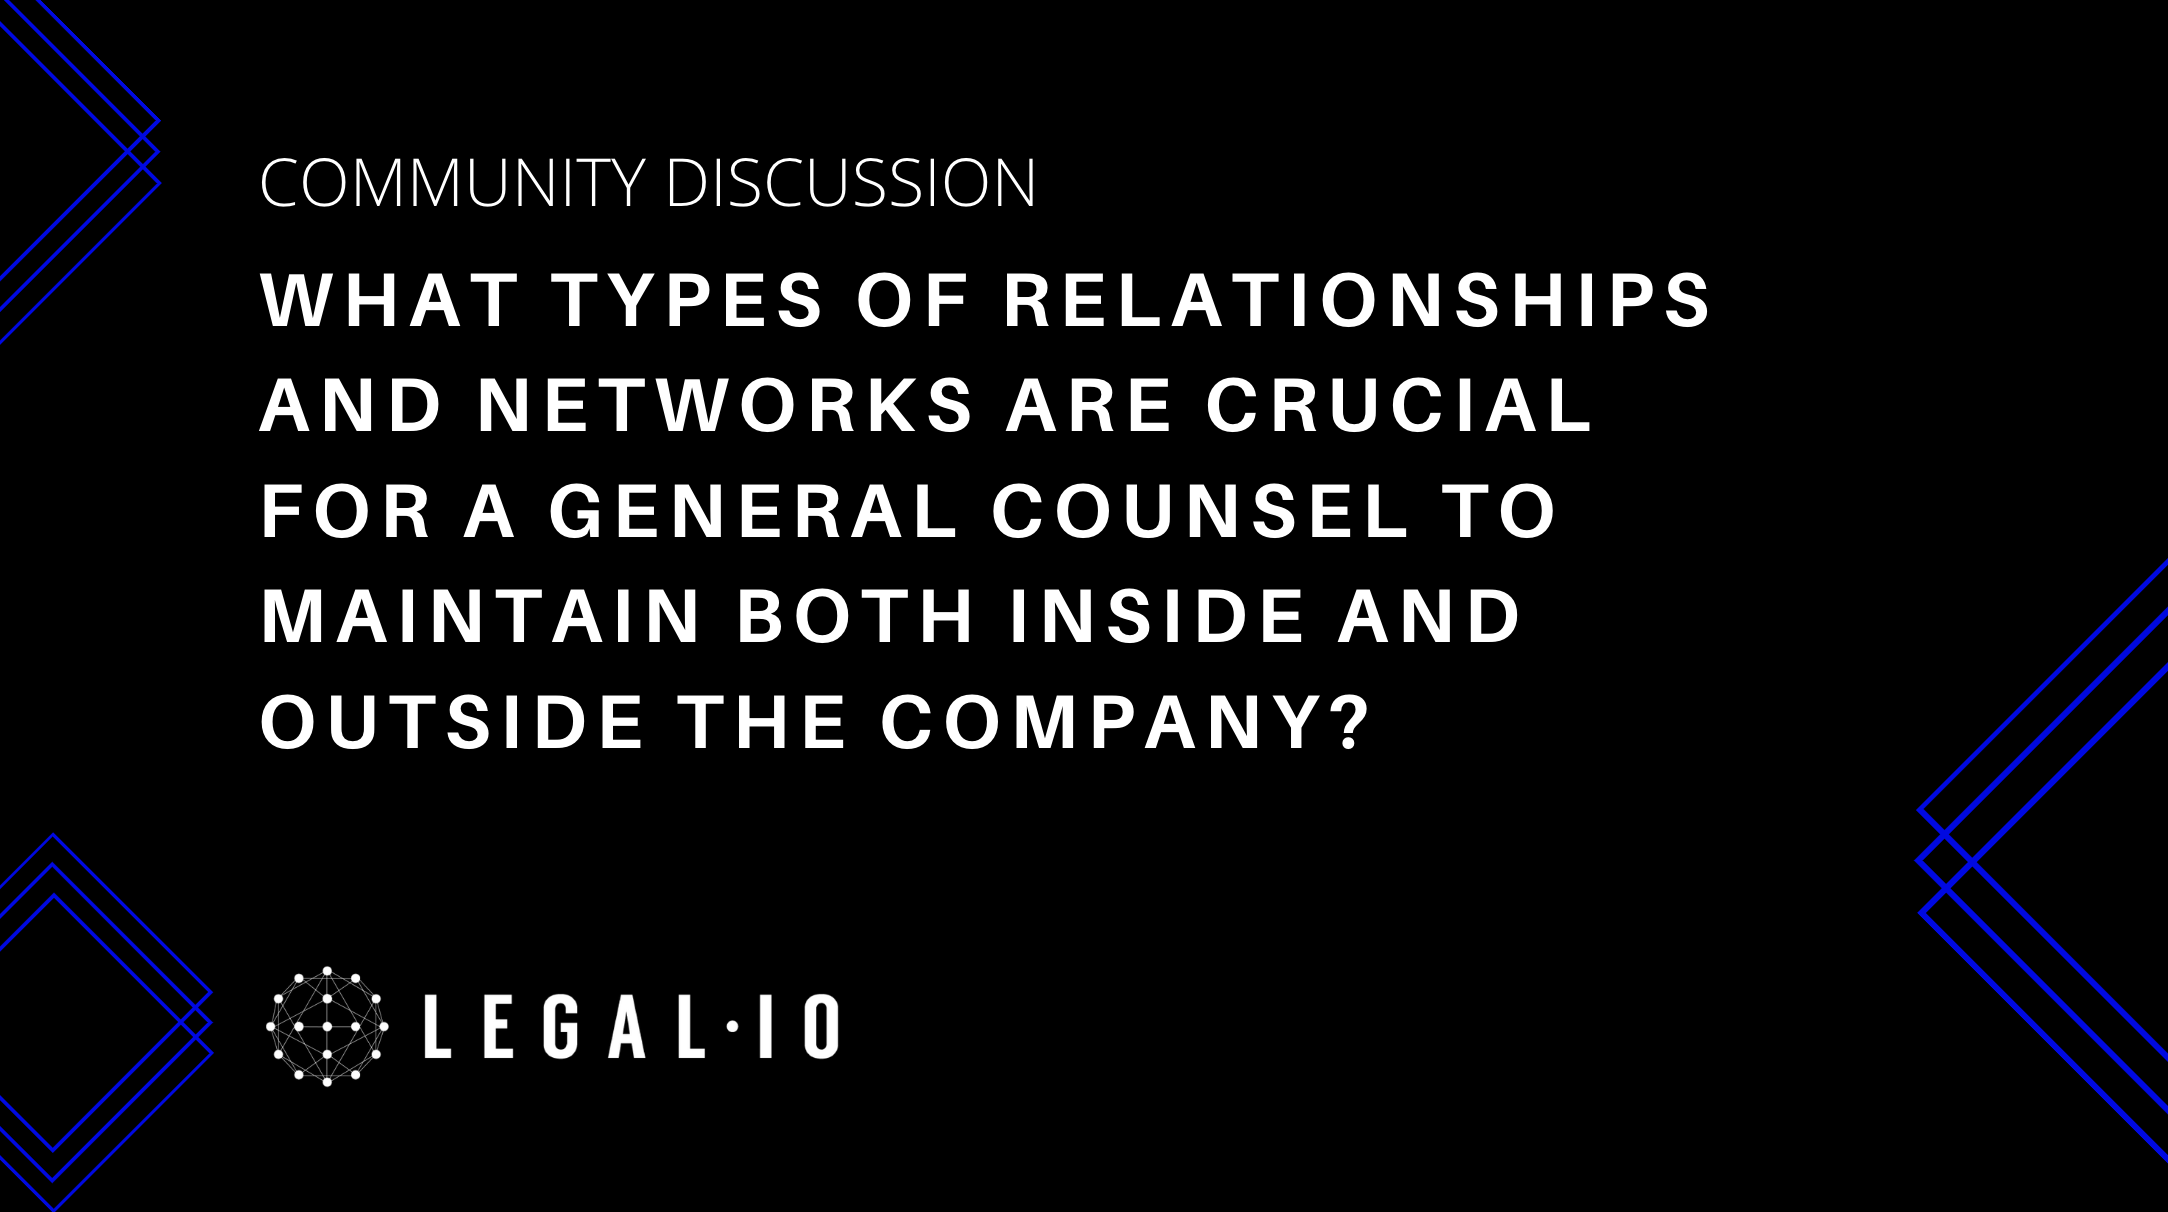 Community Discussion: What types of relationships and networks are crucial for a General Counsel to maintain both inside and outside the company?